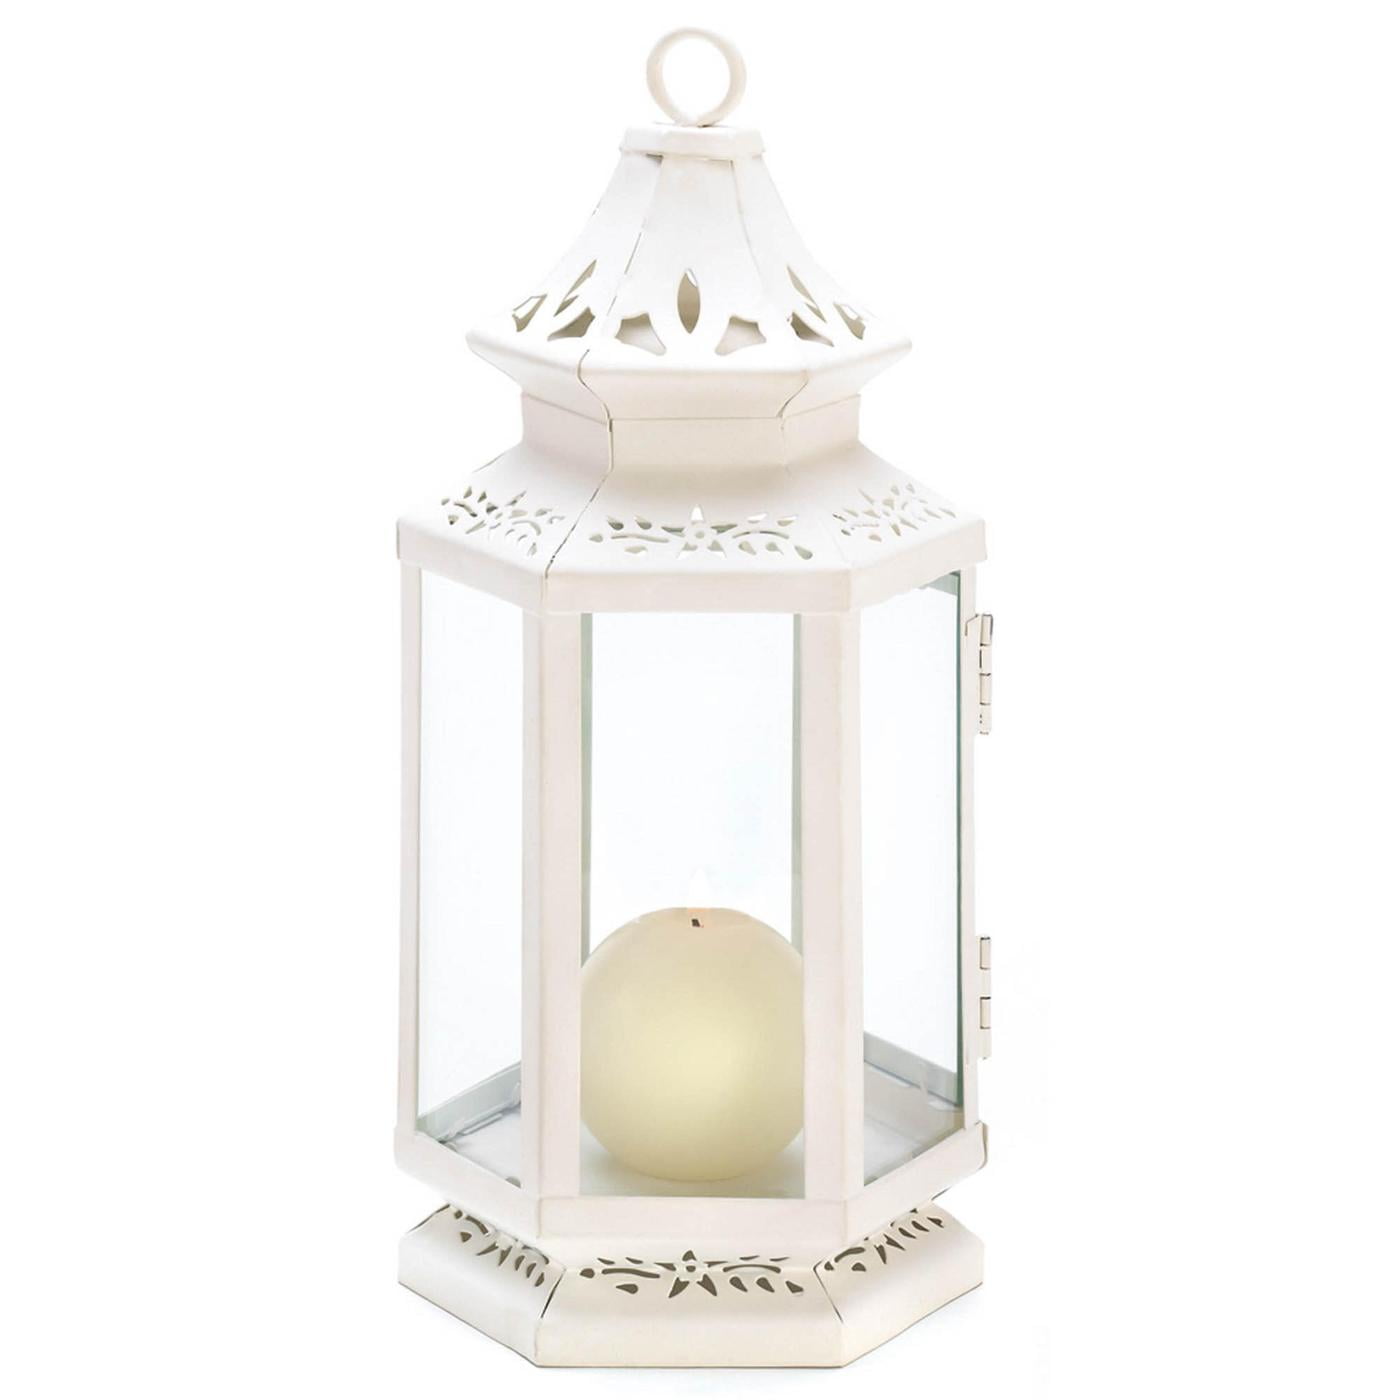 10 LARGE WHITE MOROCCAN CANDLE LANTERN 15” TALL WEDDING CENTERPIECES NEW~38466 